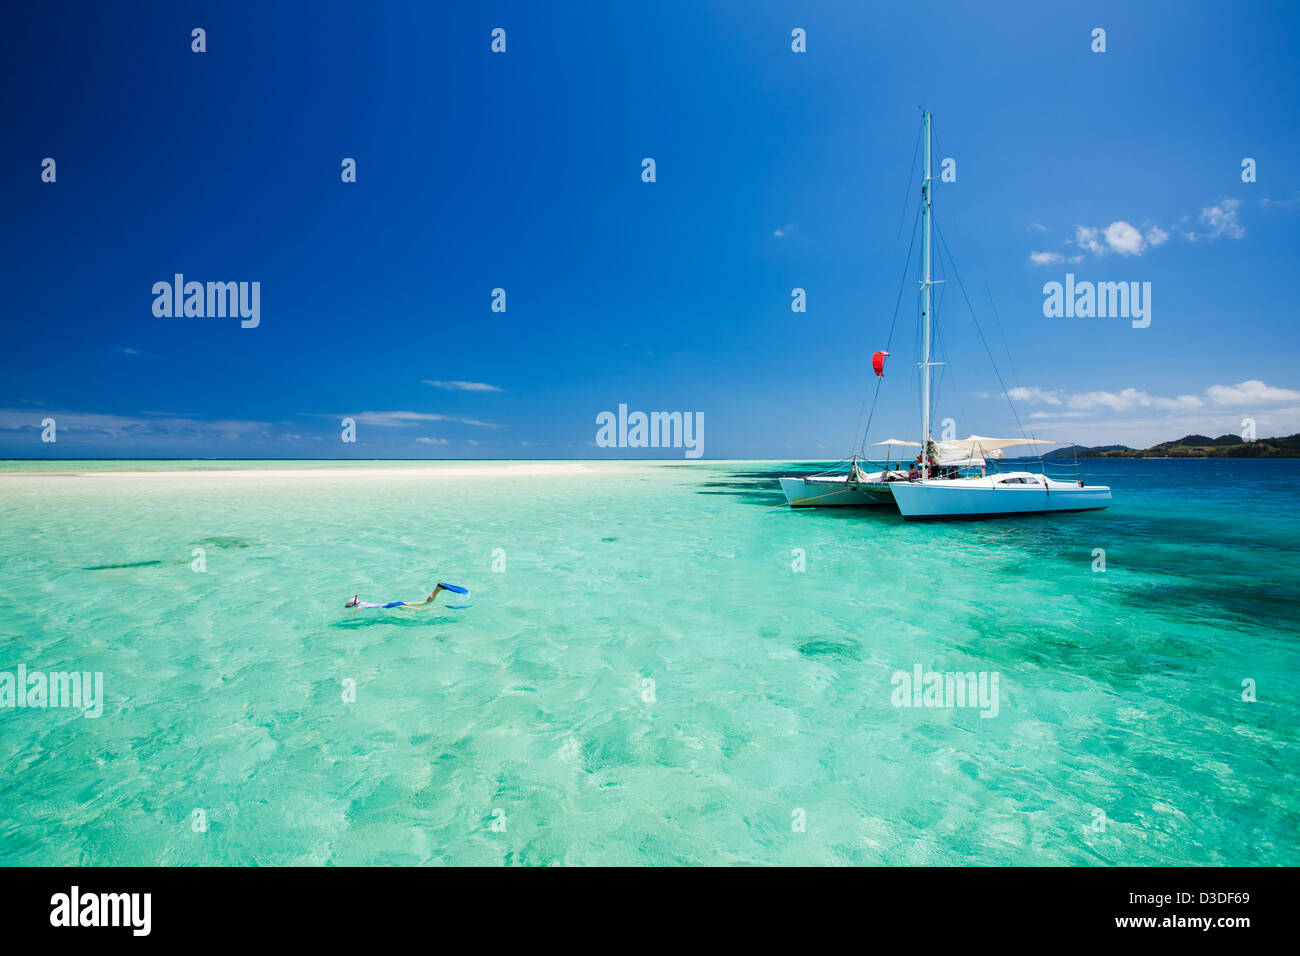 Snorkeling in shallow tropical water off the catamaran Stock Photo